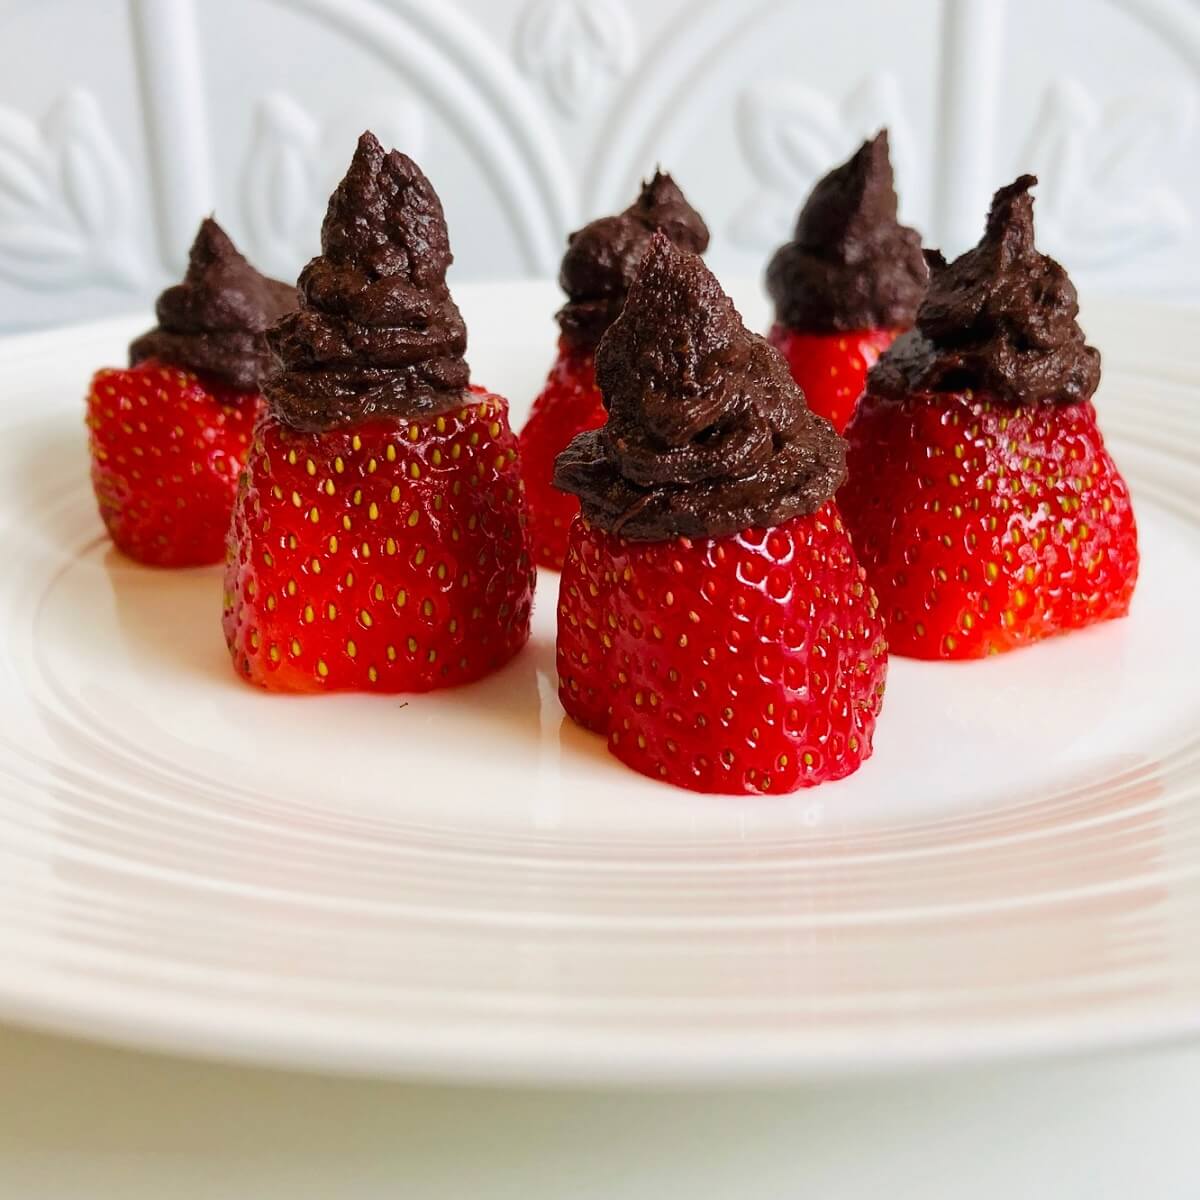 Six chocolate filled strawberries displayed on a white plate.